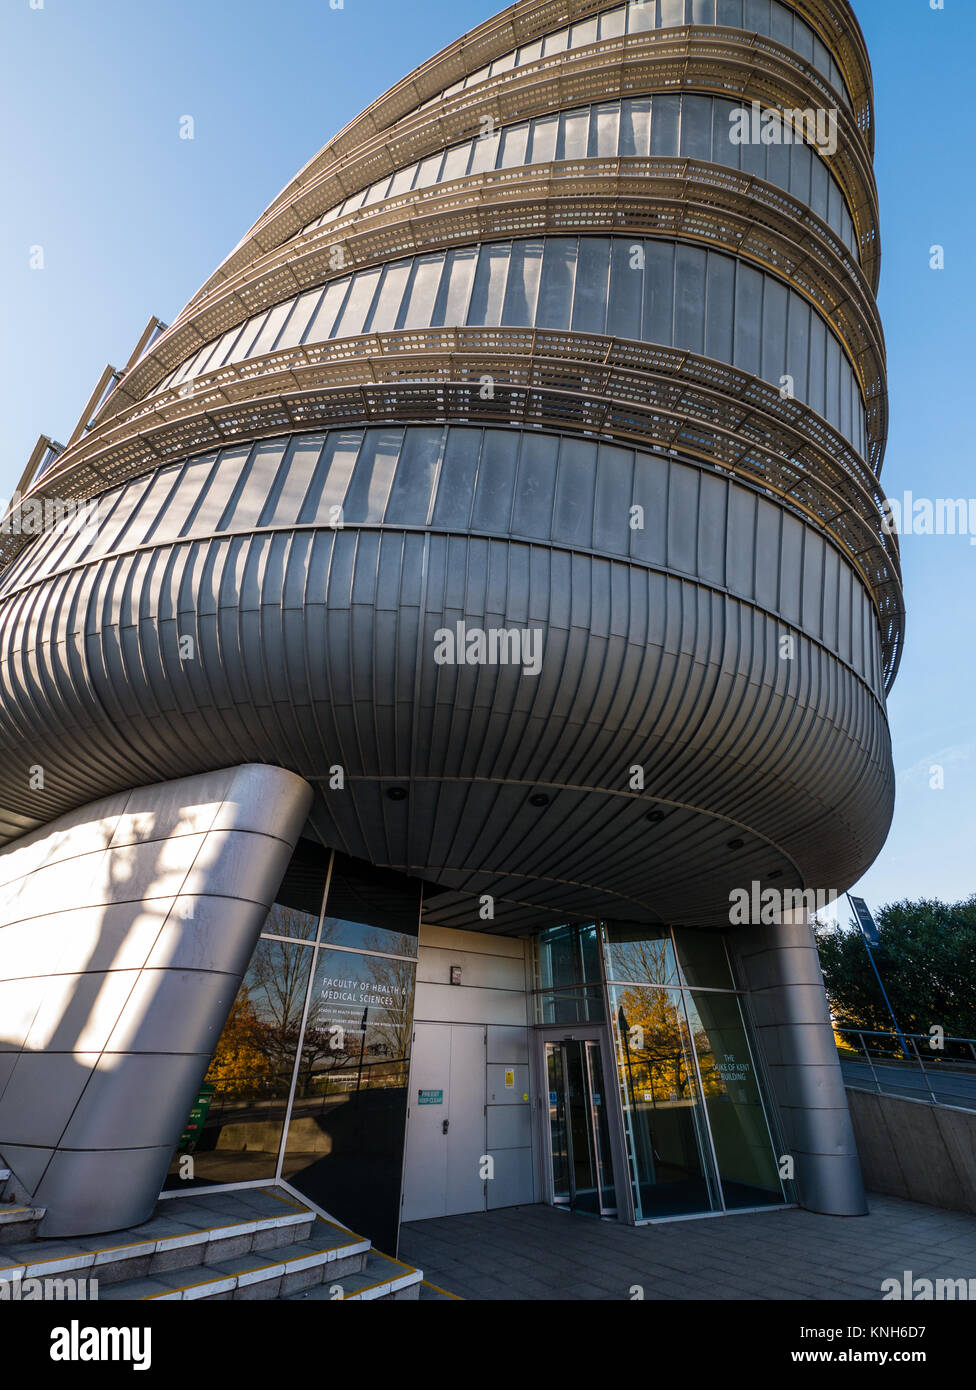 Duke of Kent Building, Faculty of Health and Medical Sciences, School of Health Sciences, University of Surrey, Guildford, Surrey, England, UK, GB. Stock Photo